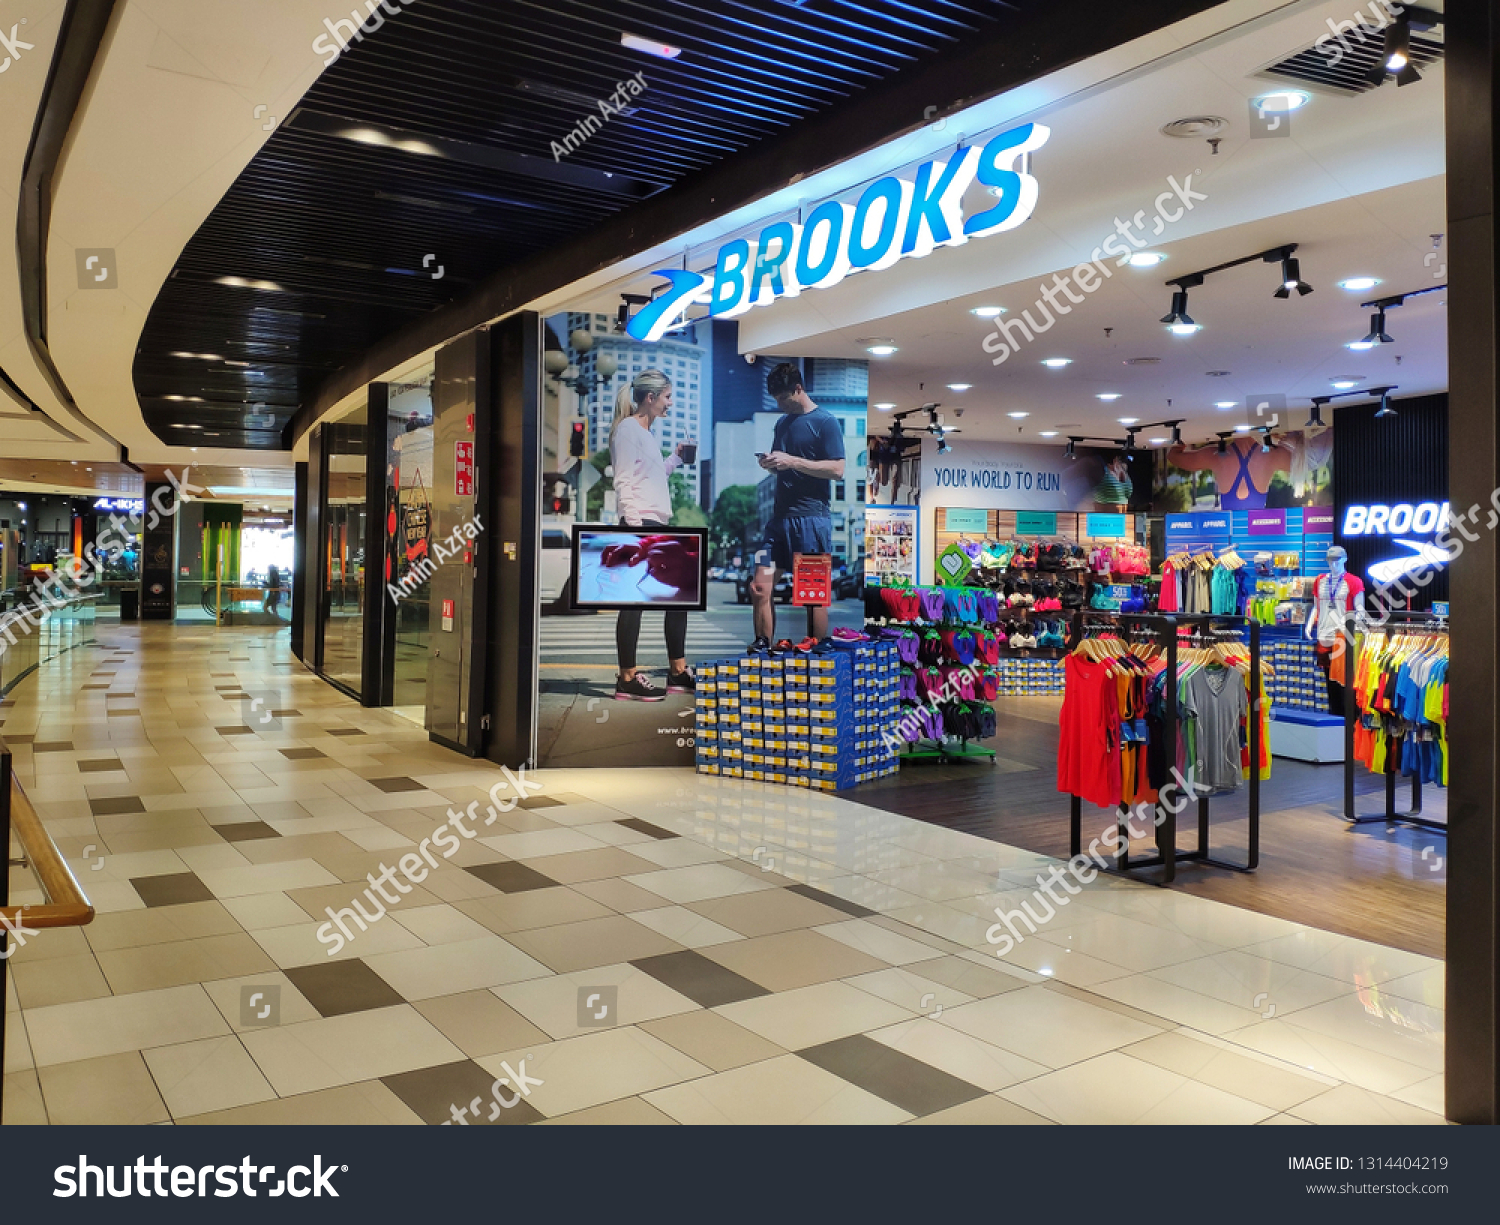 brooks store shoes